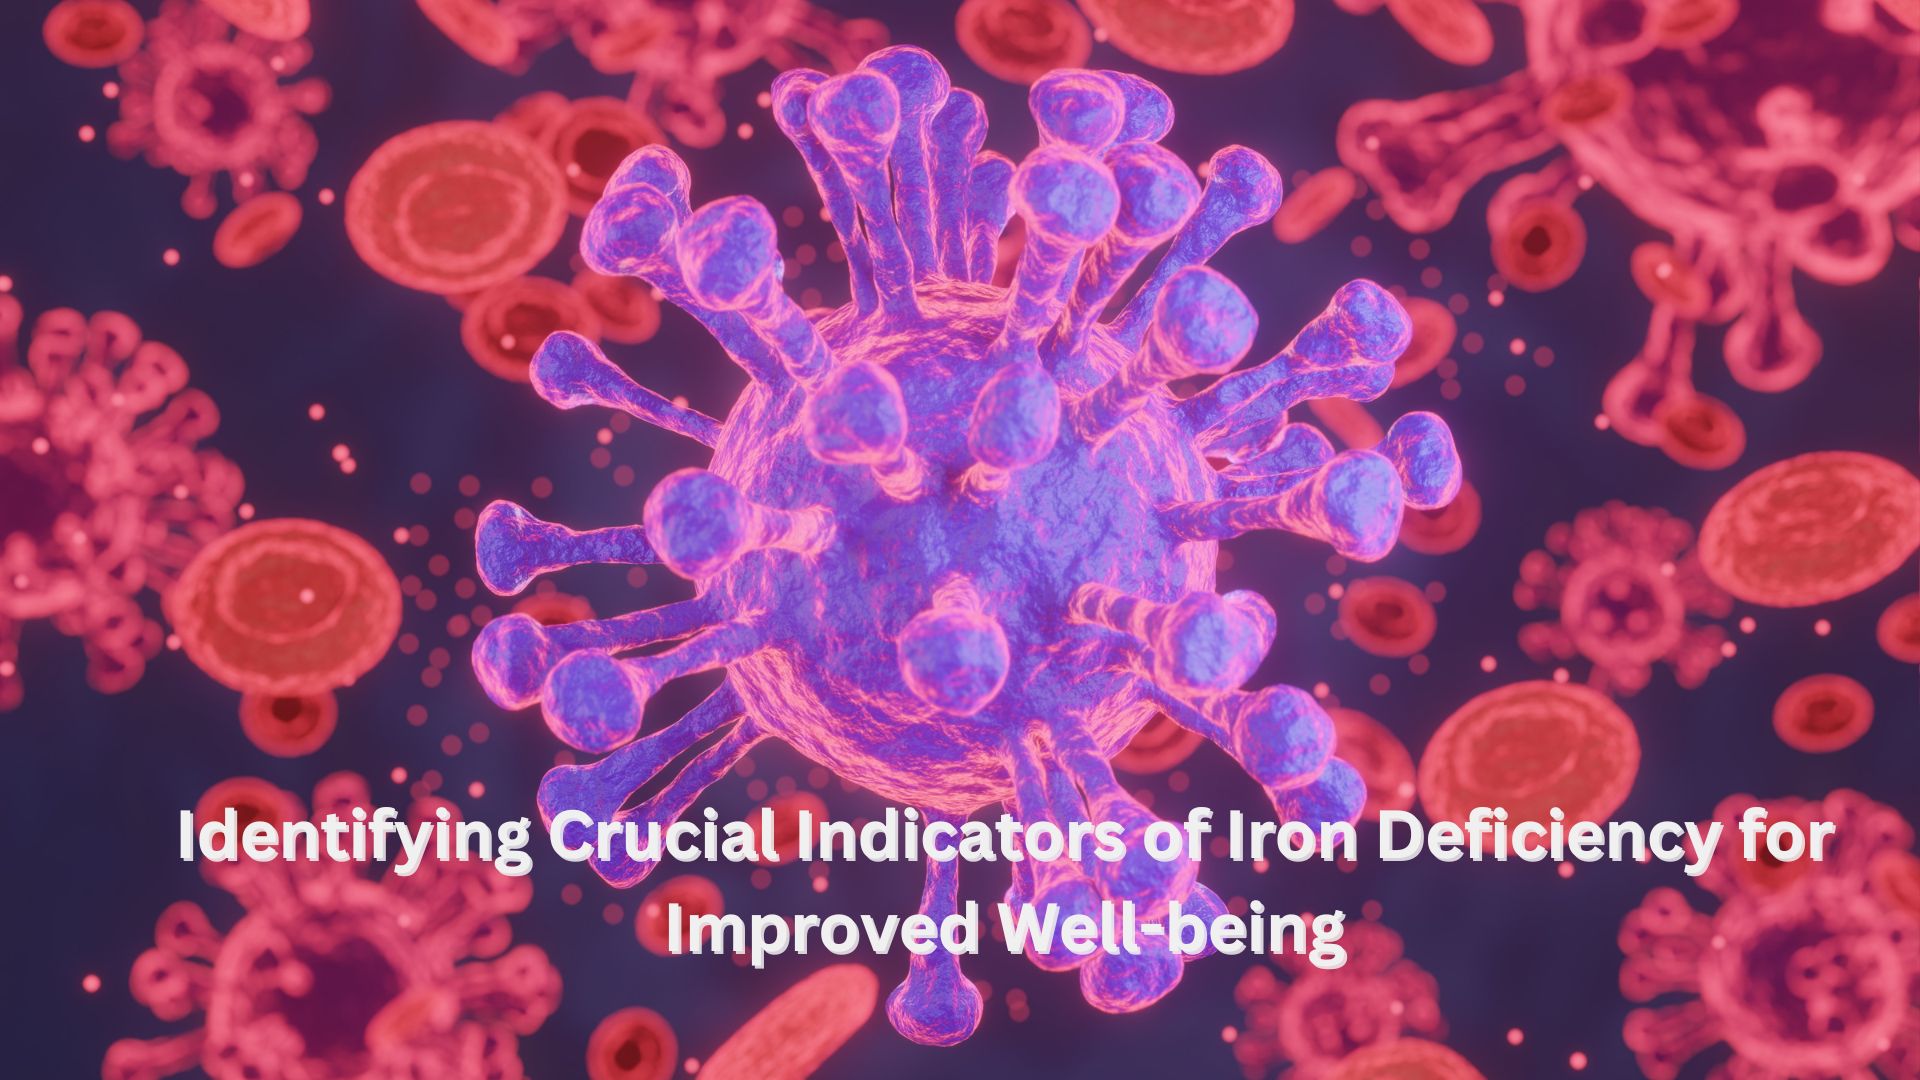 Identifying Crucial Indicators of Iron Deficiency for Improved Well-being